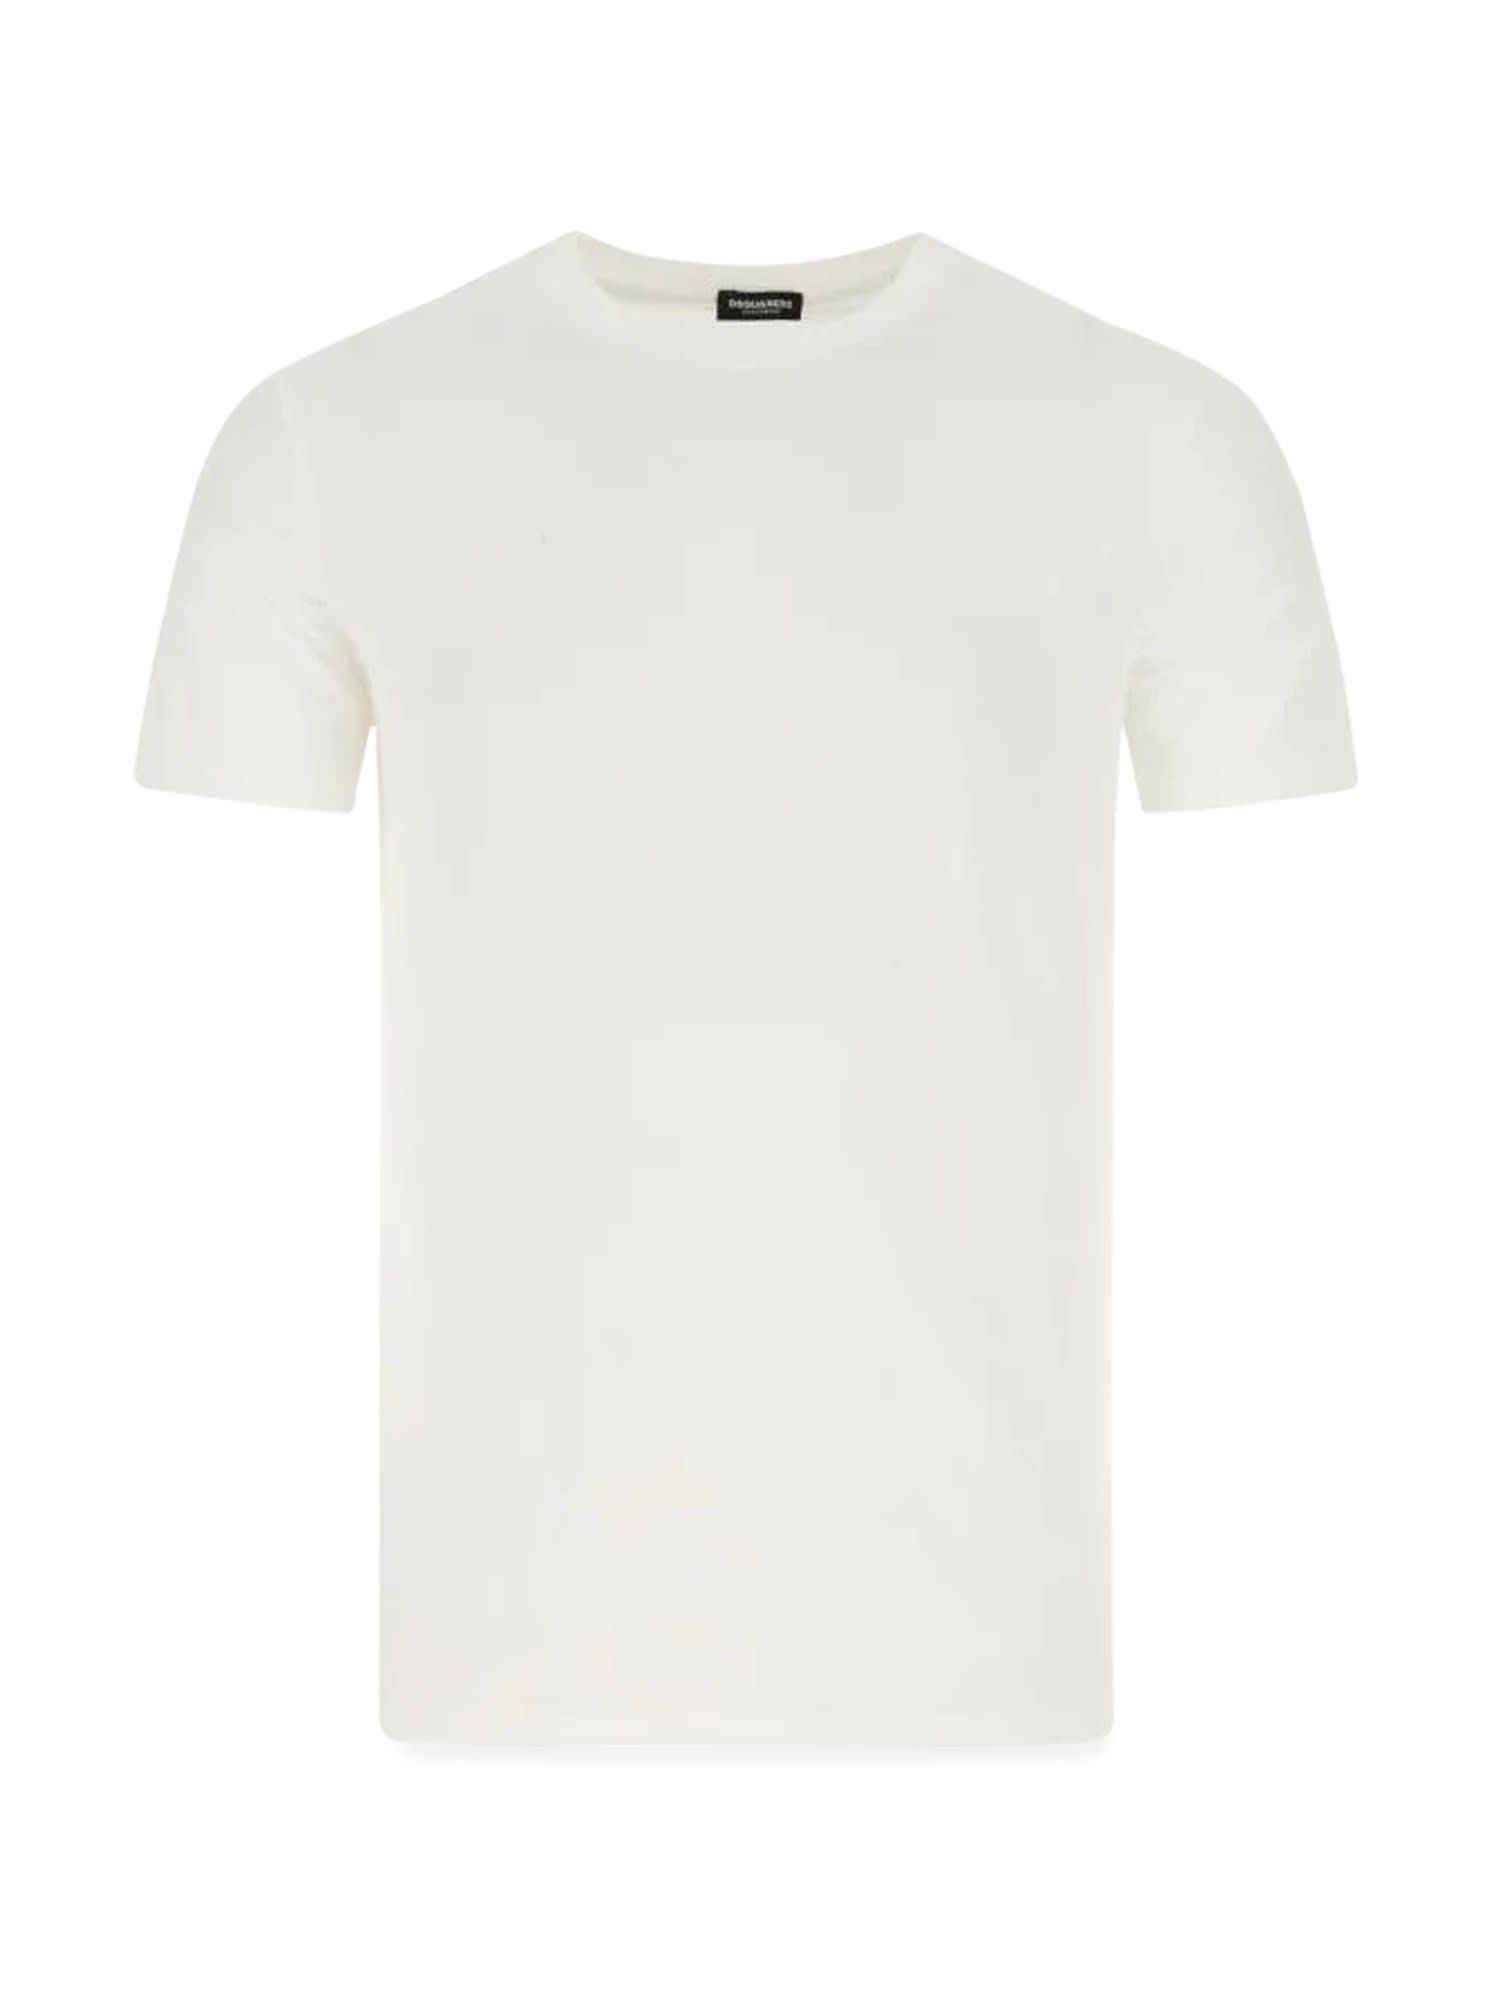 DSQUARED2 PACK OF TWO BASIC T-SHIRTS